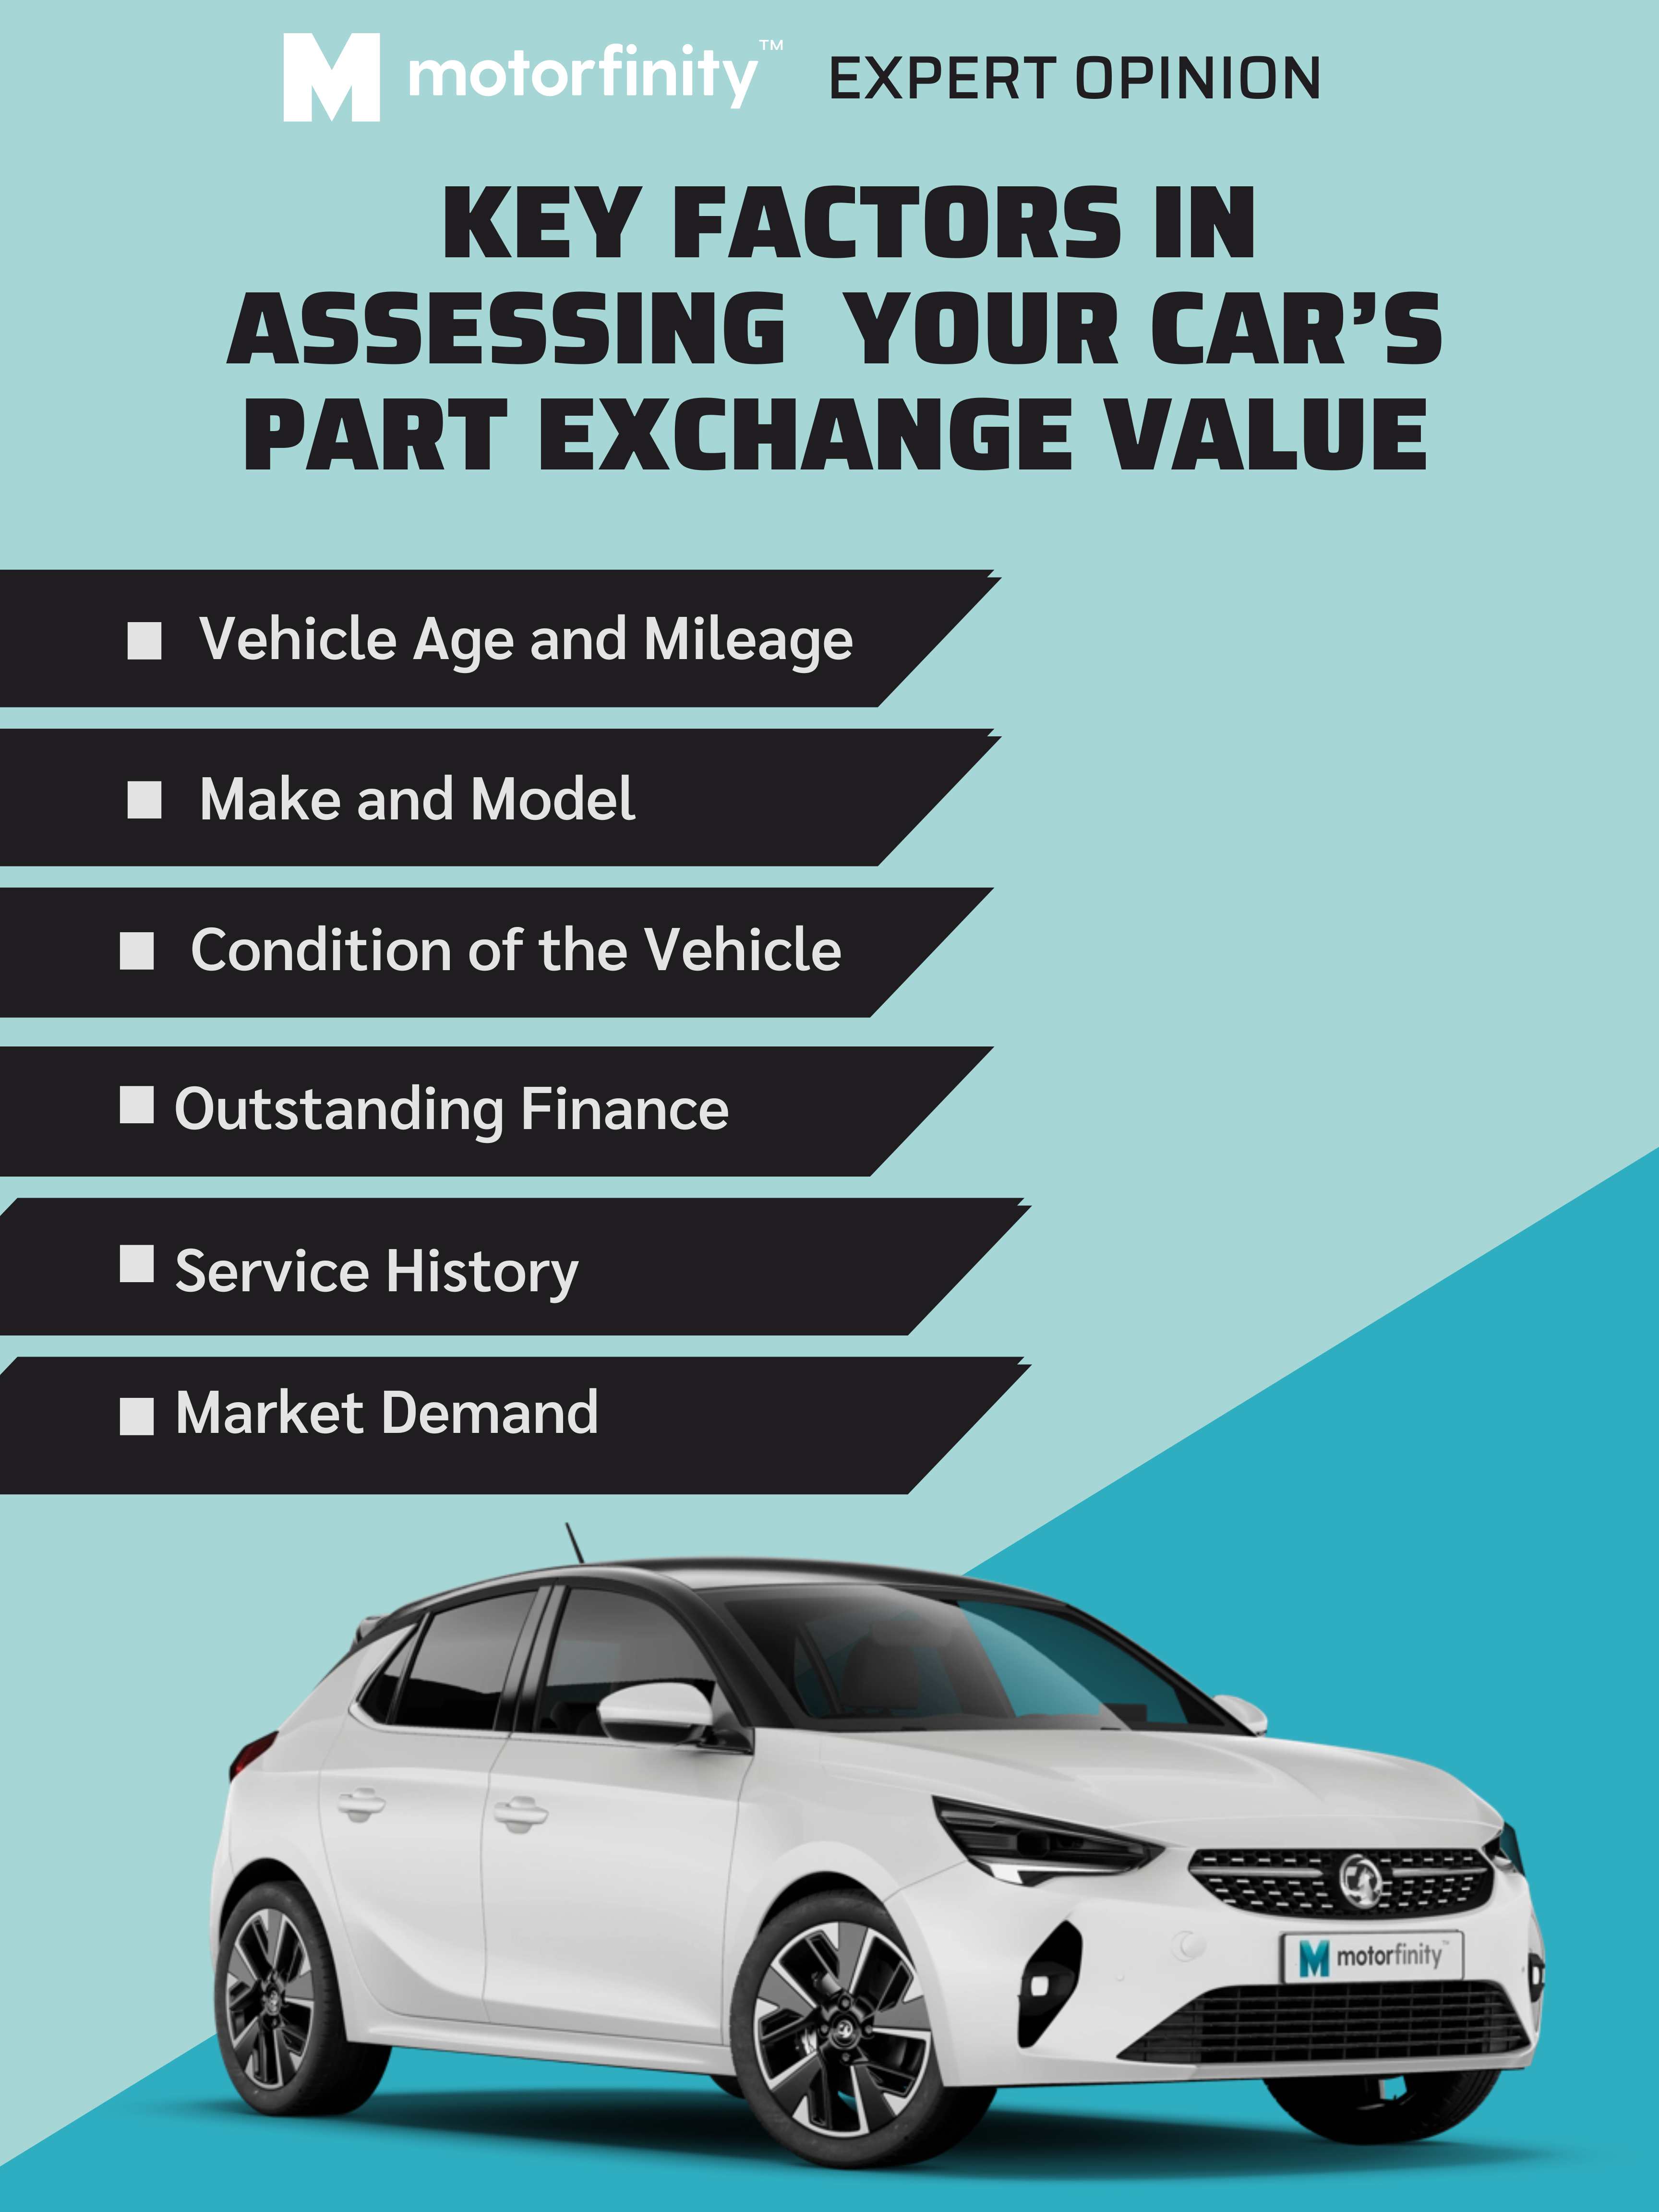 Infographic on Motorfinity expert opinion on how to assess car value for part exchange